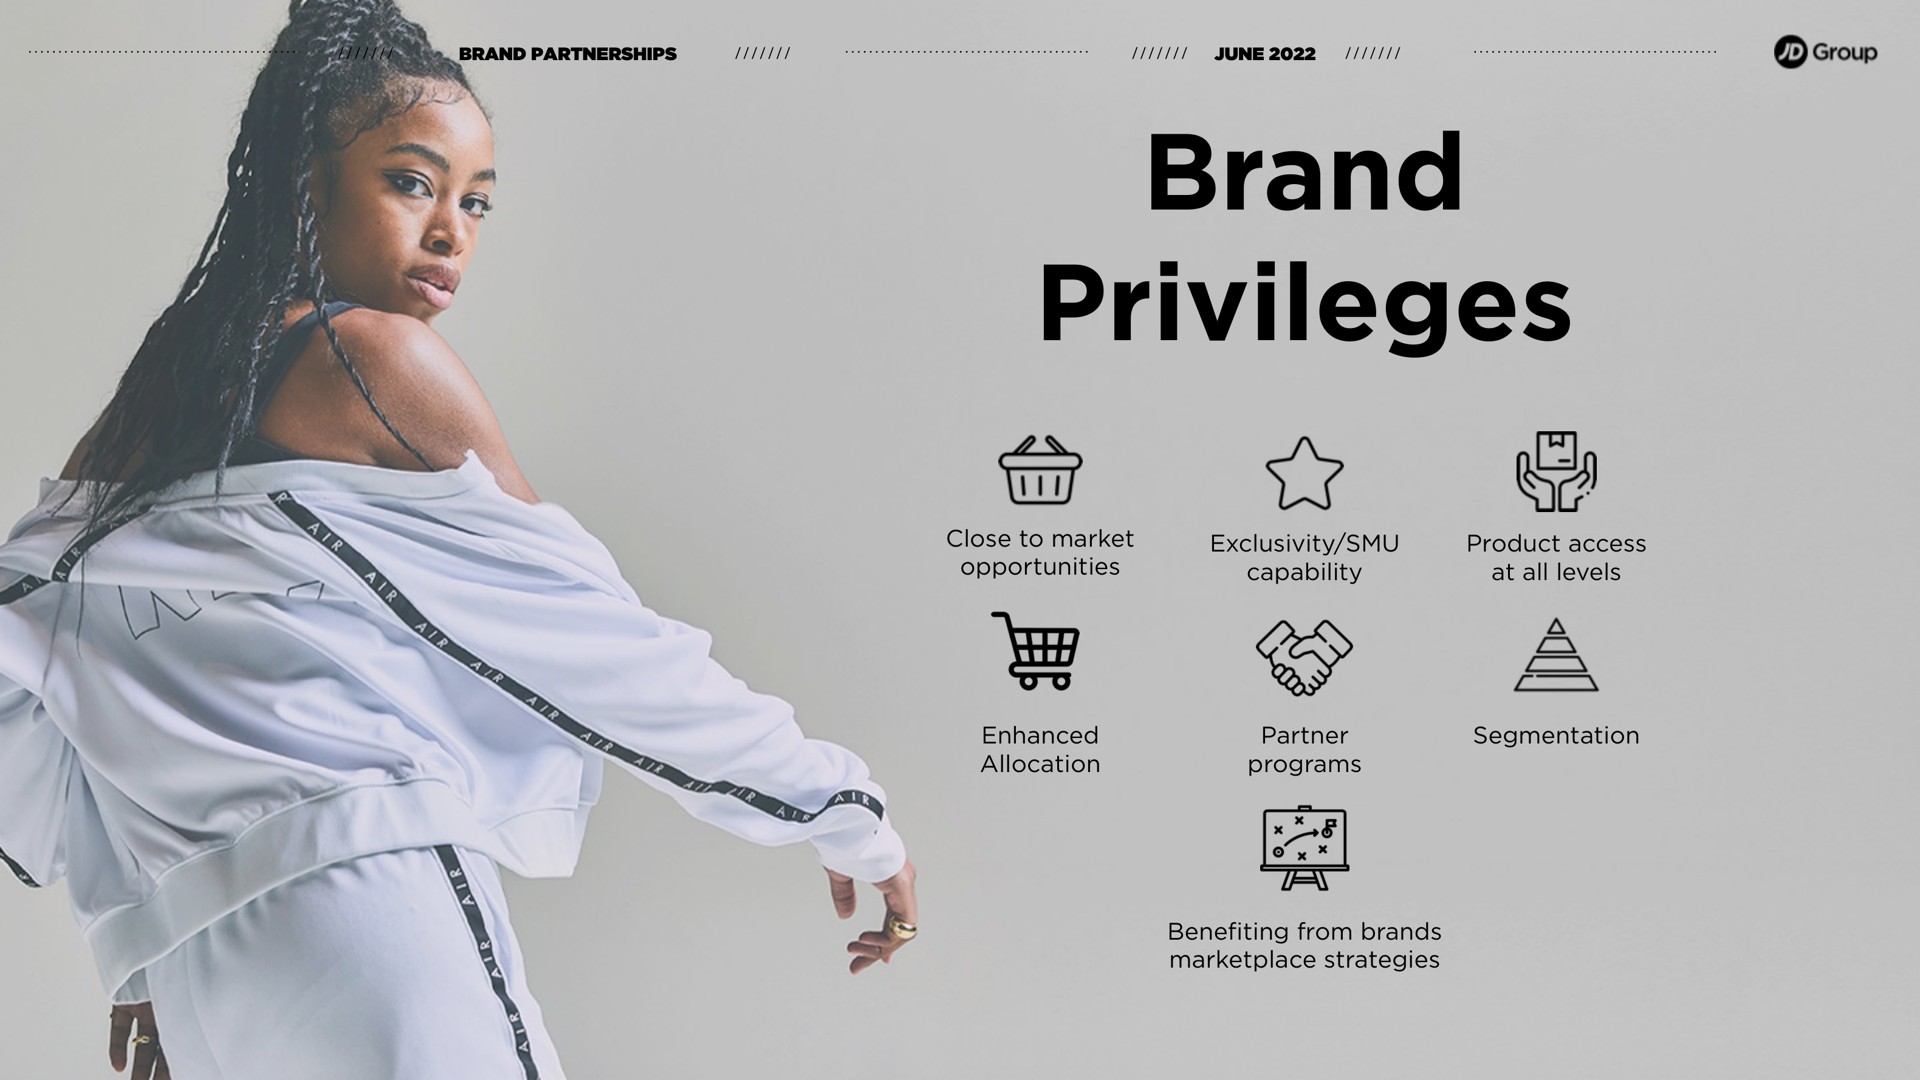 brand privileges close to market opportunities exclusivity capability product access at all levels enhanced allocation partner programs segmentation benefiting from brands strategies ann if partnerships min ase sune group | JD Sports